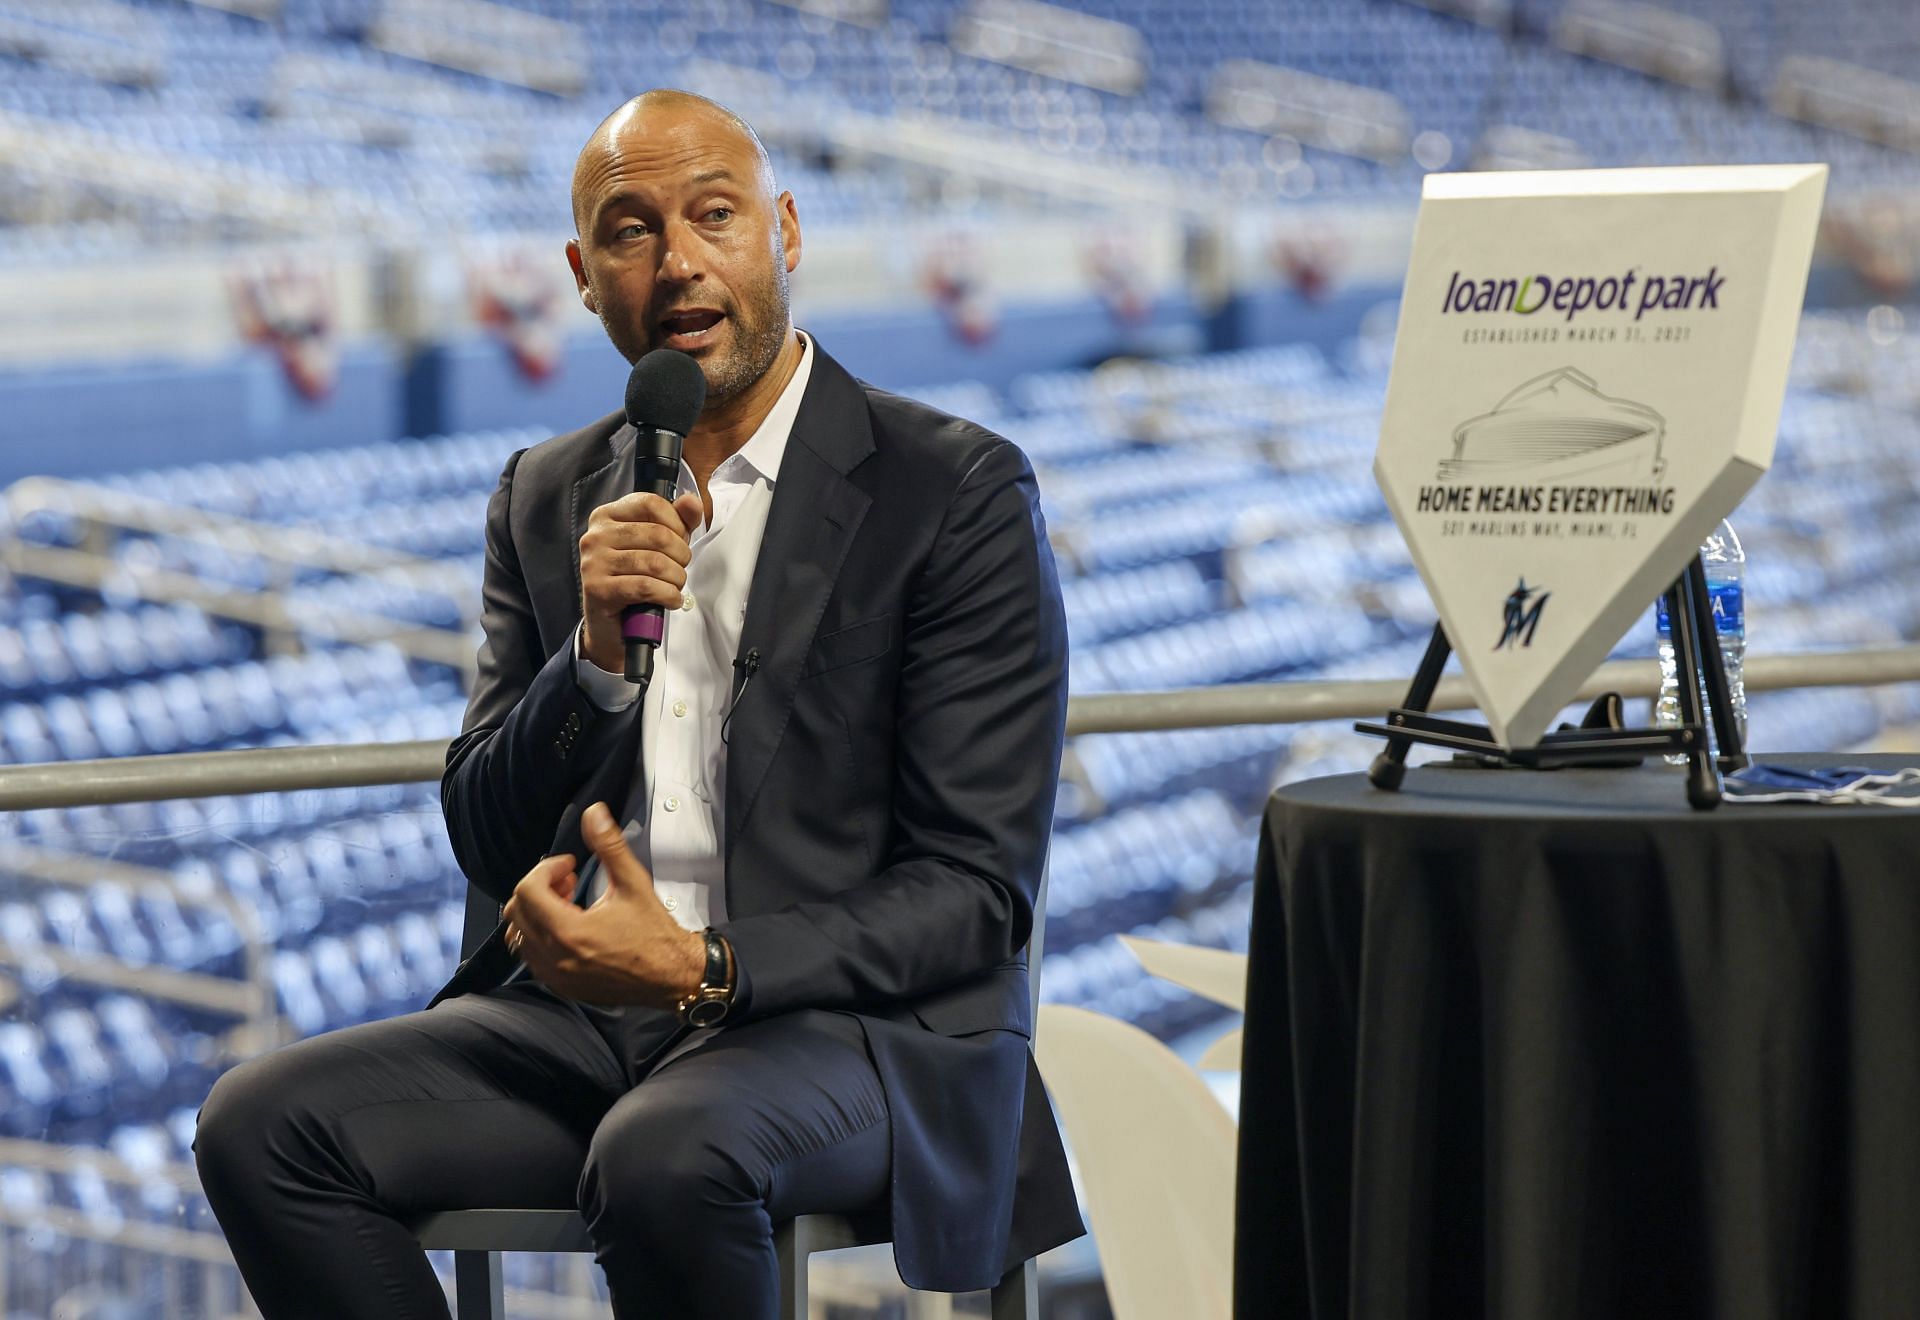 Derek Jeter leads induction class for the National Baseball Hall